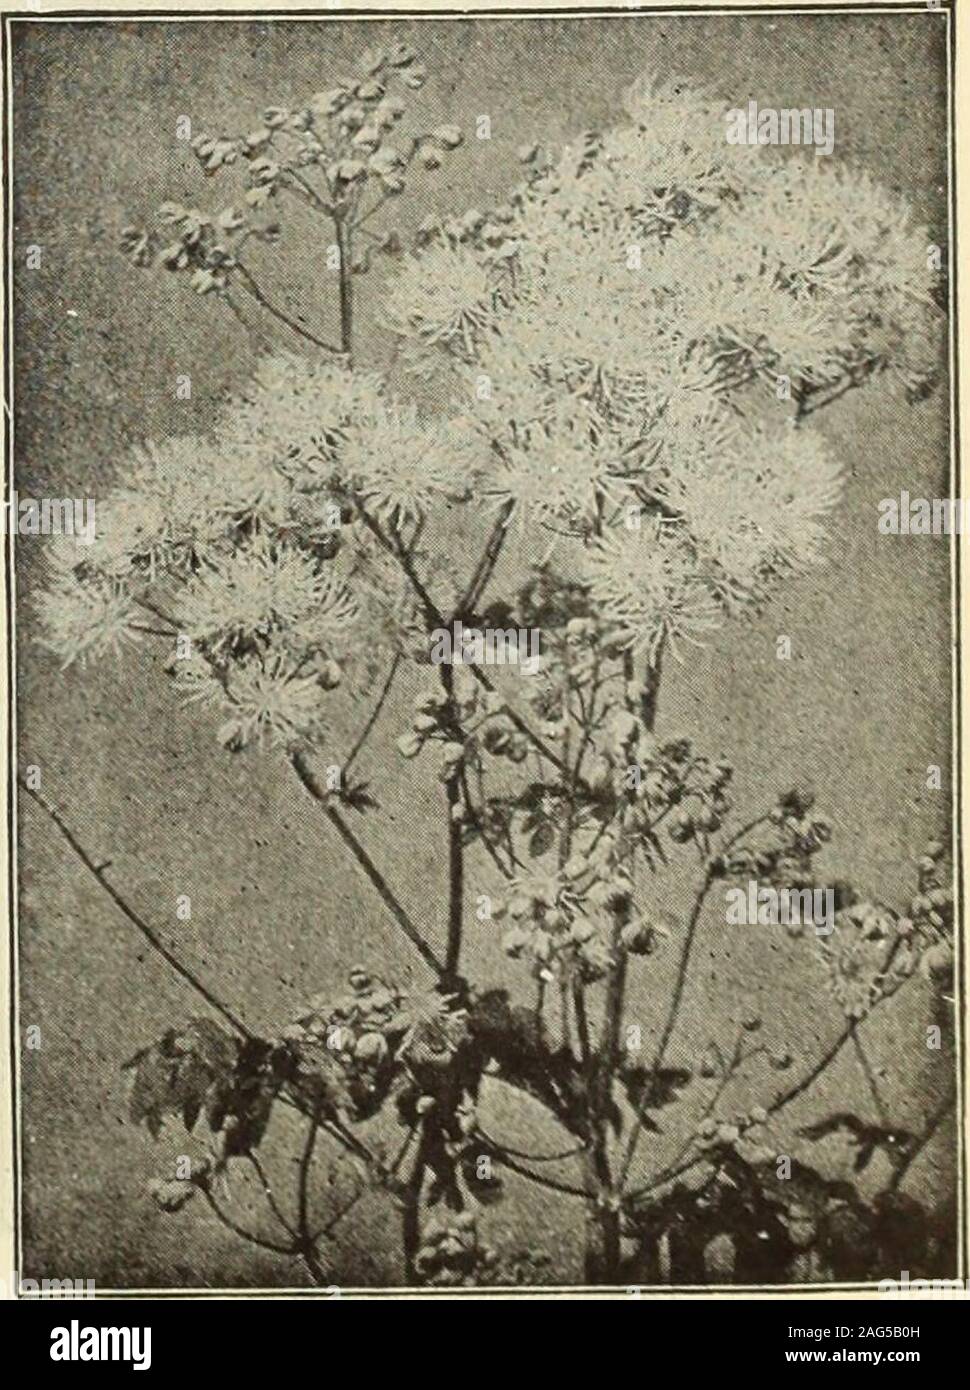 . Dreer's 1913 garden book. in the greatest profusion in late fall clusters of most peculiar lily-like flowers, which are creamy white, spotted purplish-brown. Shouldbe planted in semi-shady situation.Macropoda Striata. Useful for its foli&lt;- ge, which is prettily variegatedgreen and white. 25 cts. each; $2.50 per doz. TROLLIUS (Globe Flower). Desirable free-flowering plants, producing their giant Buttercup-likeblossoms on stems 2 to 2«- feet high from May until August; succeed ad-mirably in the border in a half-shady position in well-drained, preferablylight soil. Asiaticus Flore Croceo. Da Stock Photo